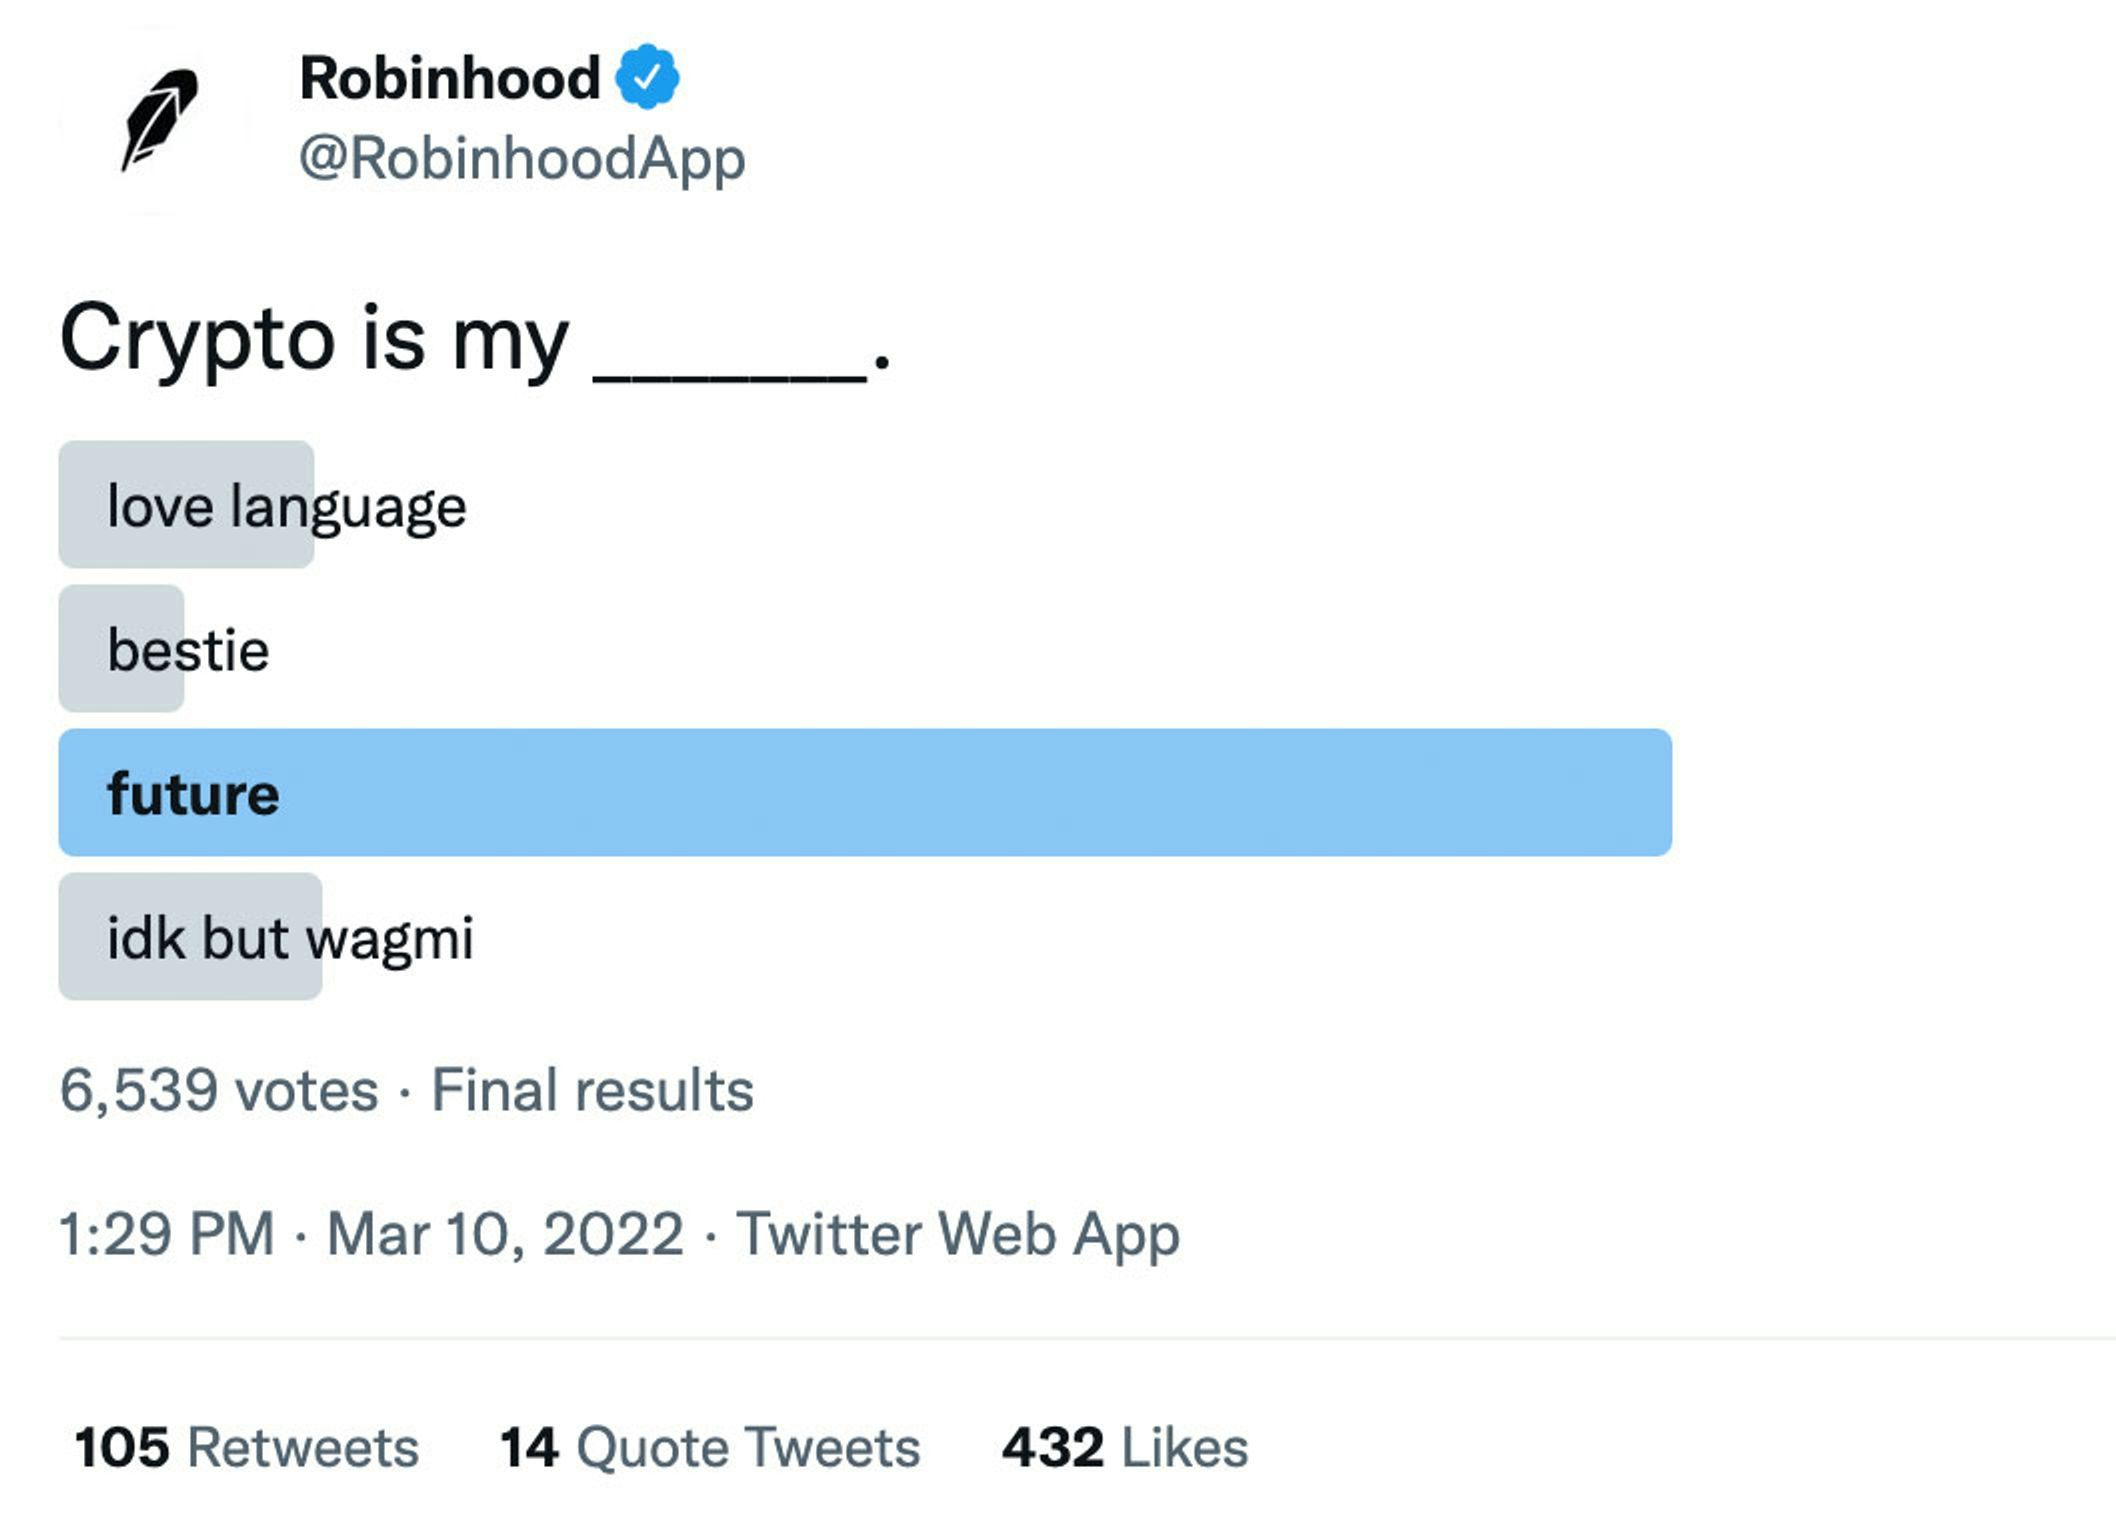 A Twitter poll by Robinhood with the statement "Crypto is my _____." "future" is the winning option.